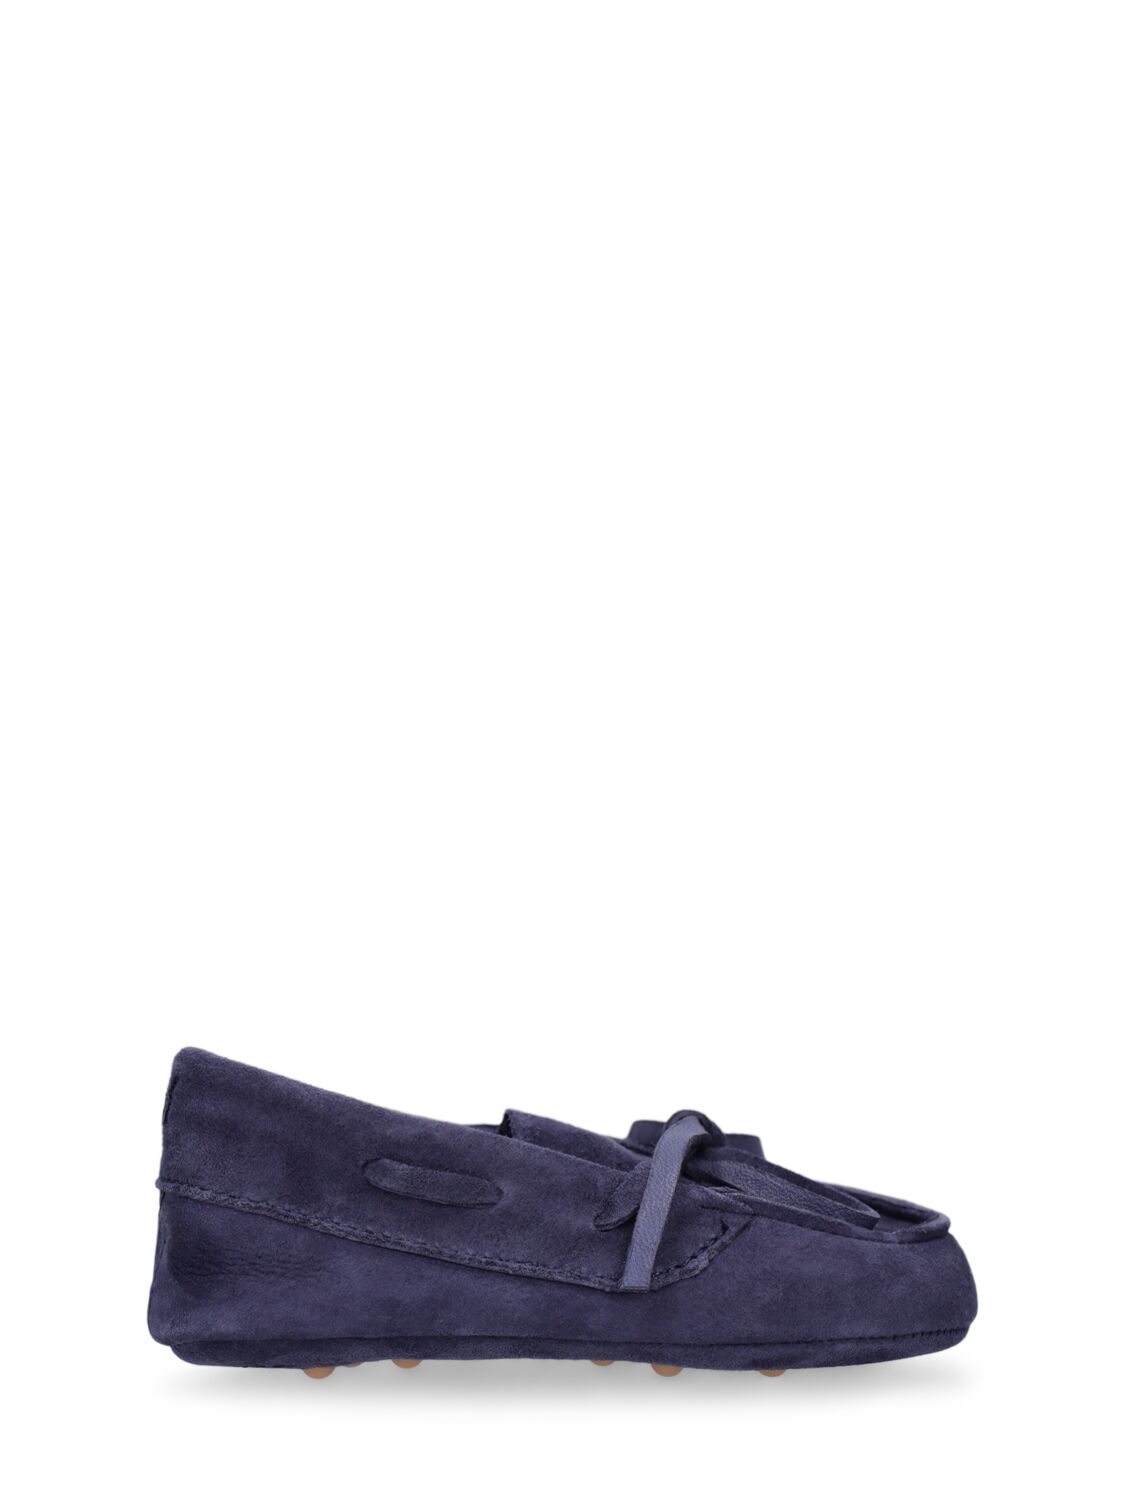 Image of Suede Loafers